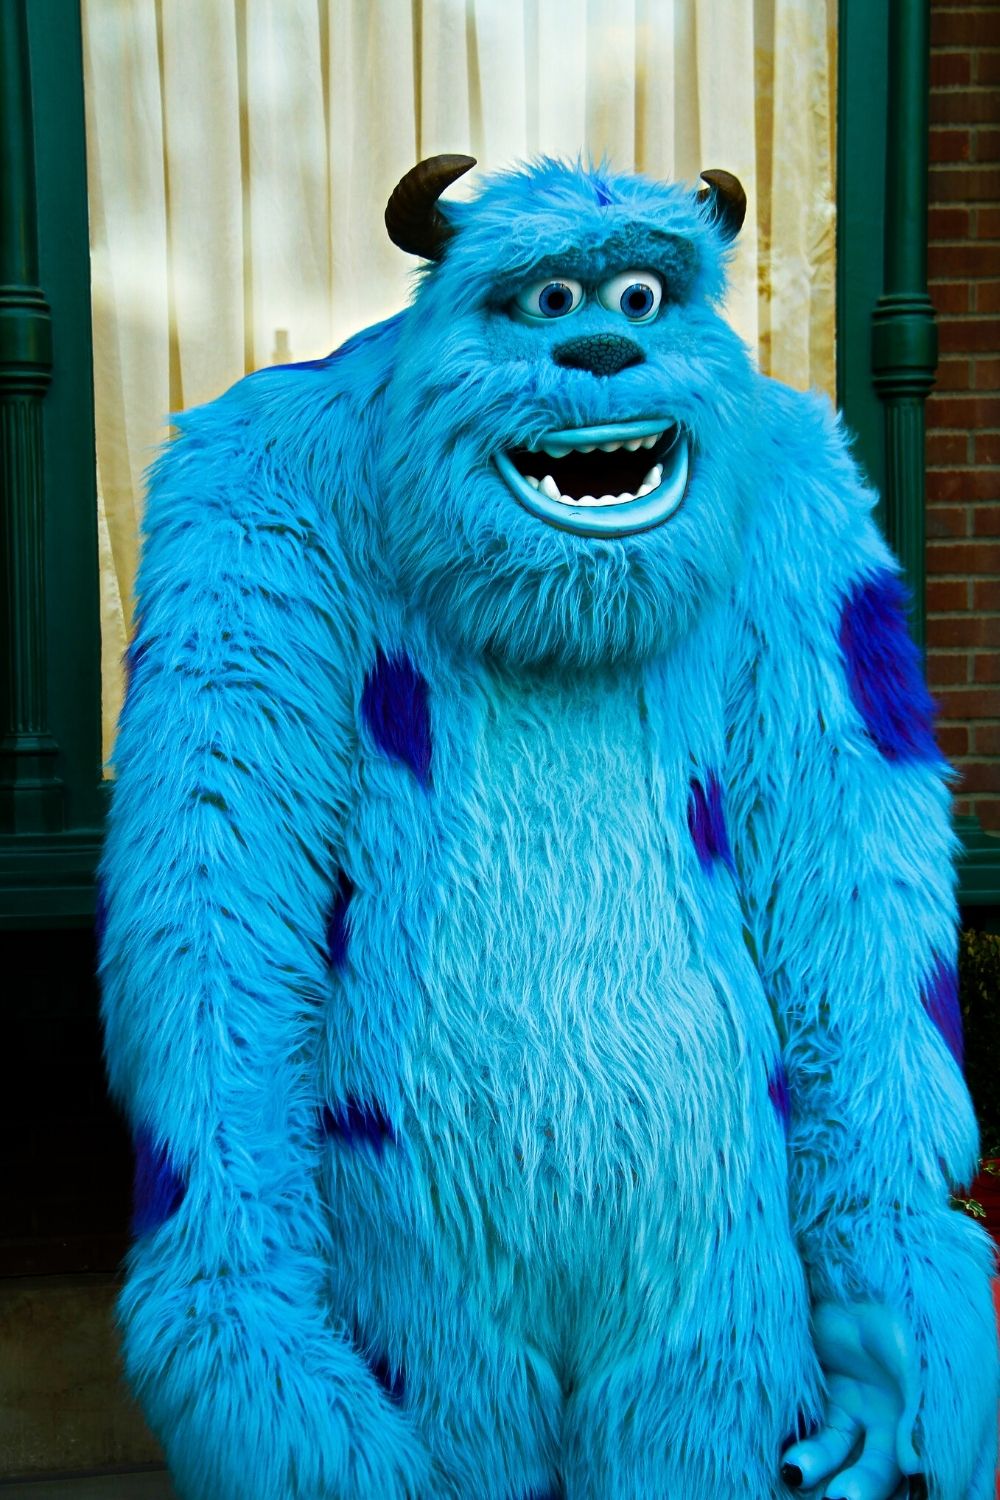 James P. Sullivan, or Sully, from Monster's Inc., greeting fans at Disneyland. Sully is believed to be the tallest Disney character.